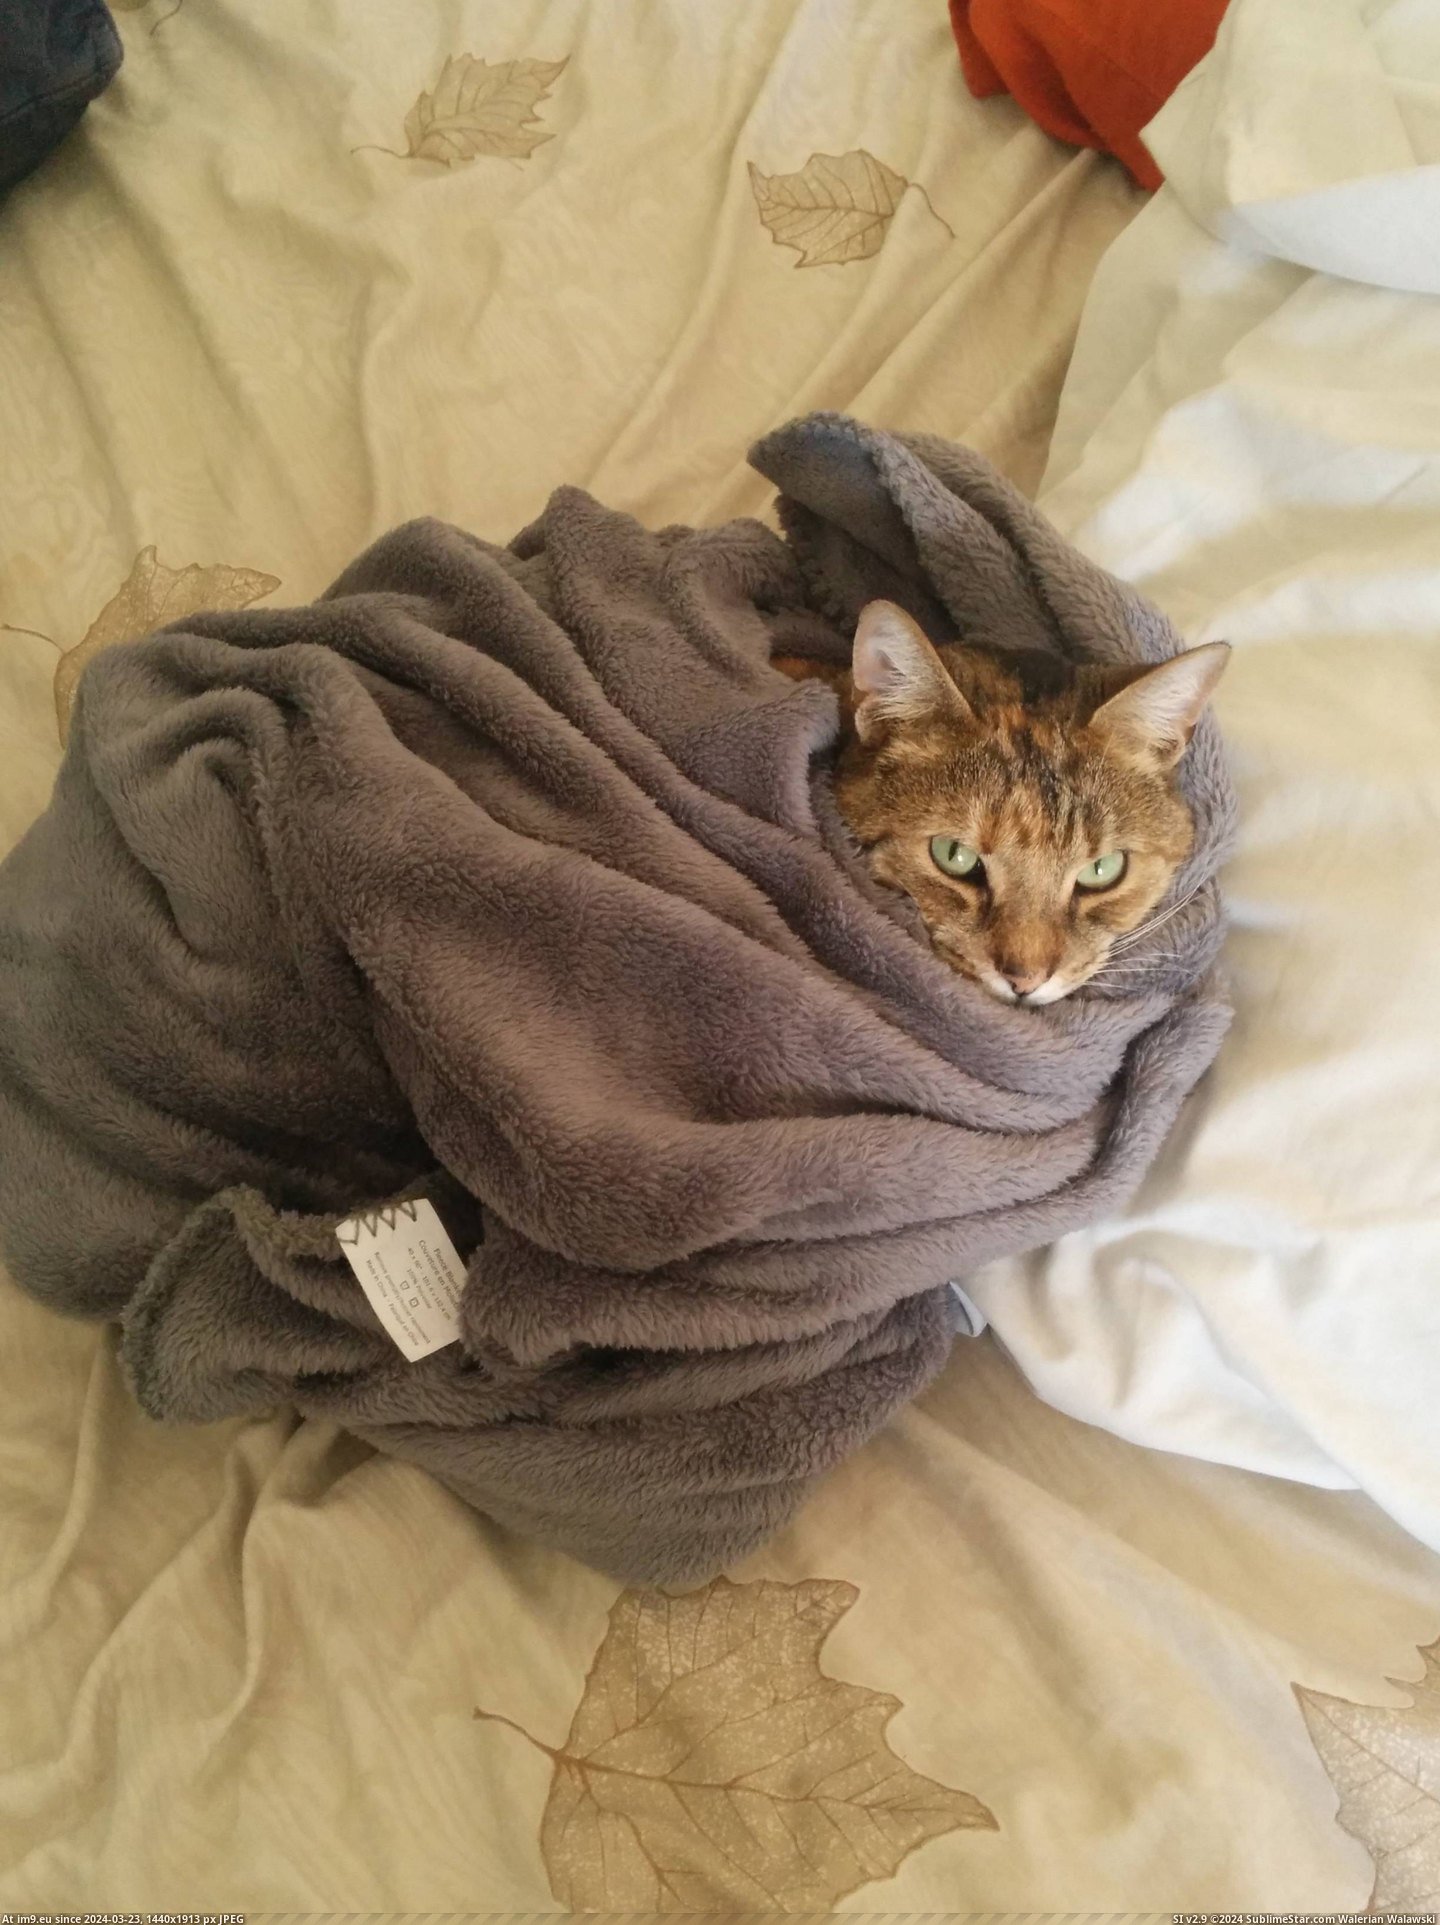 #Morning #Meows #Wrap [Aww] She meows every morning until I wrap her up Pic. (Image of album My r/AWW favs))